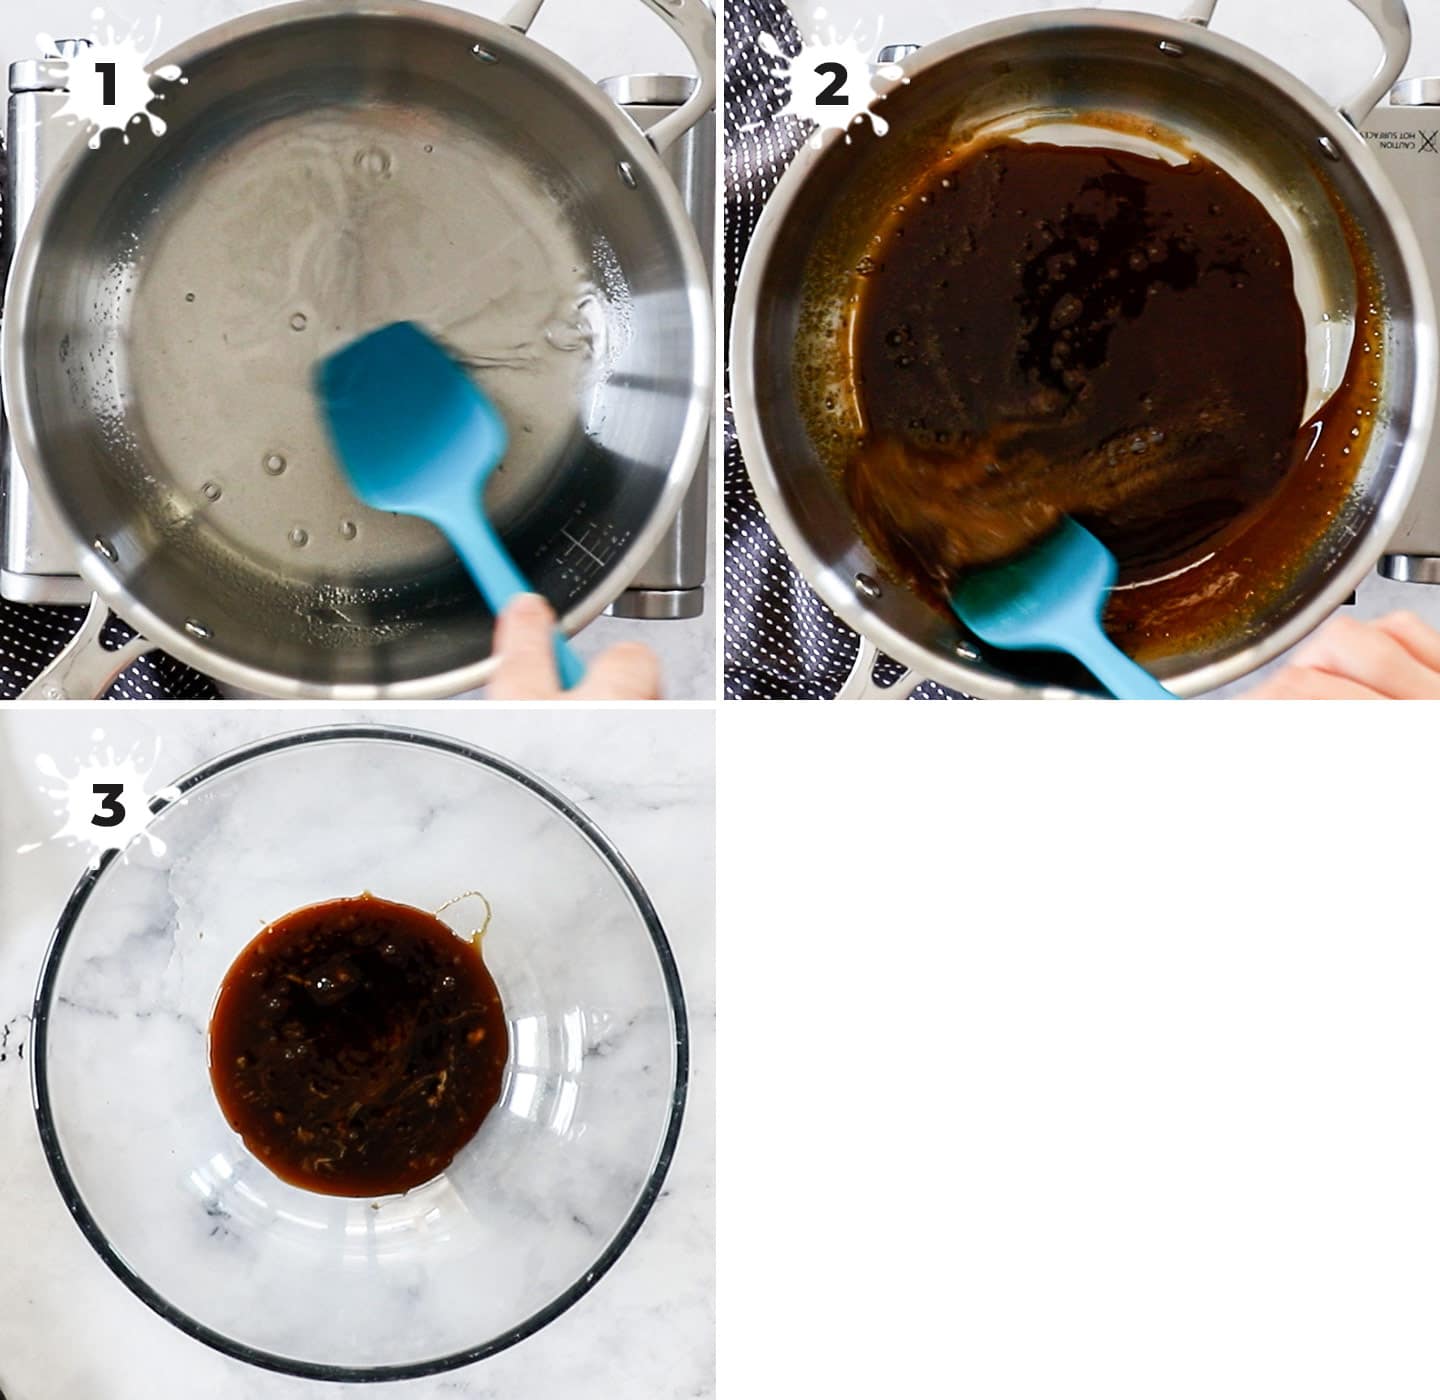 Dissolving gelatine, coffee and sugar in water in a pan.